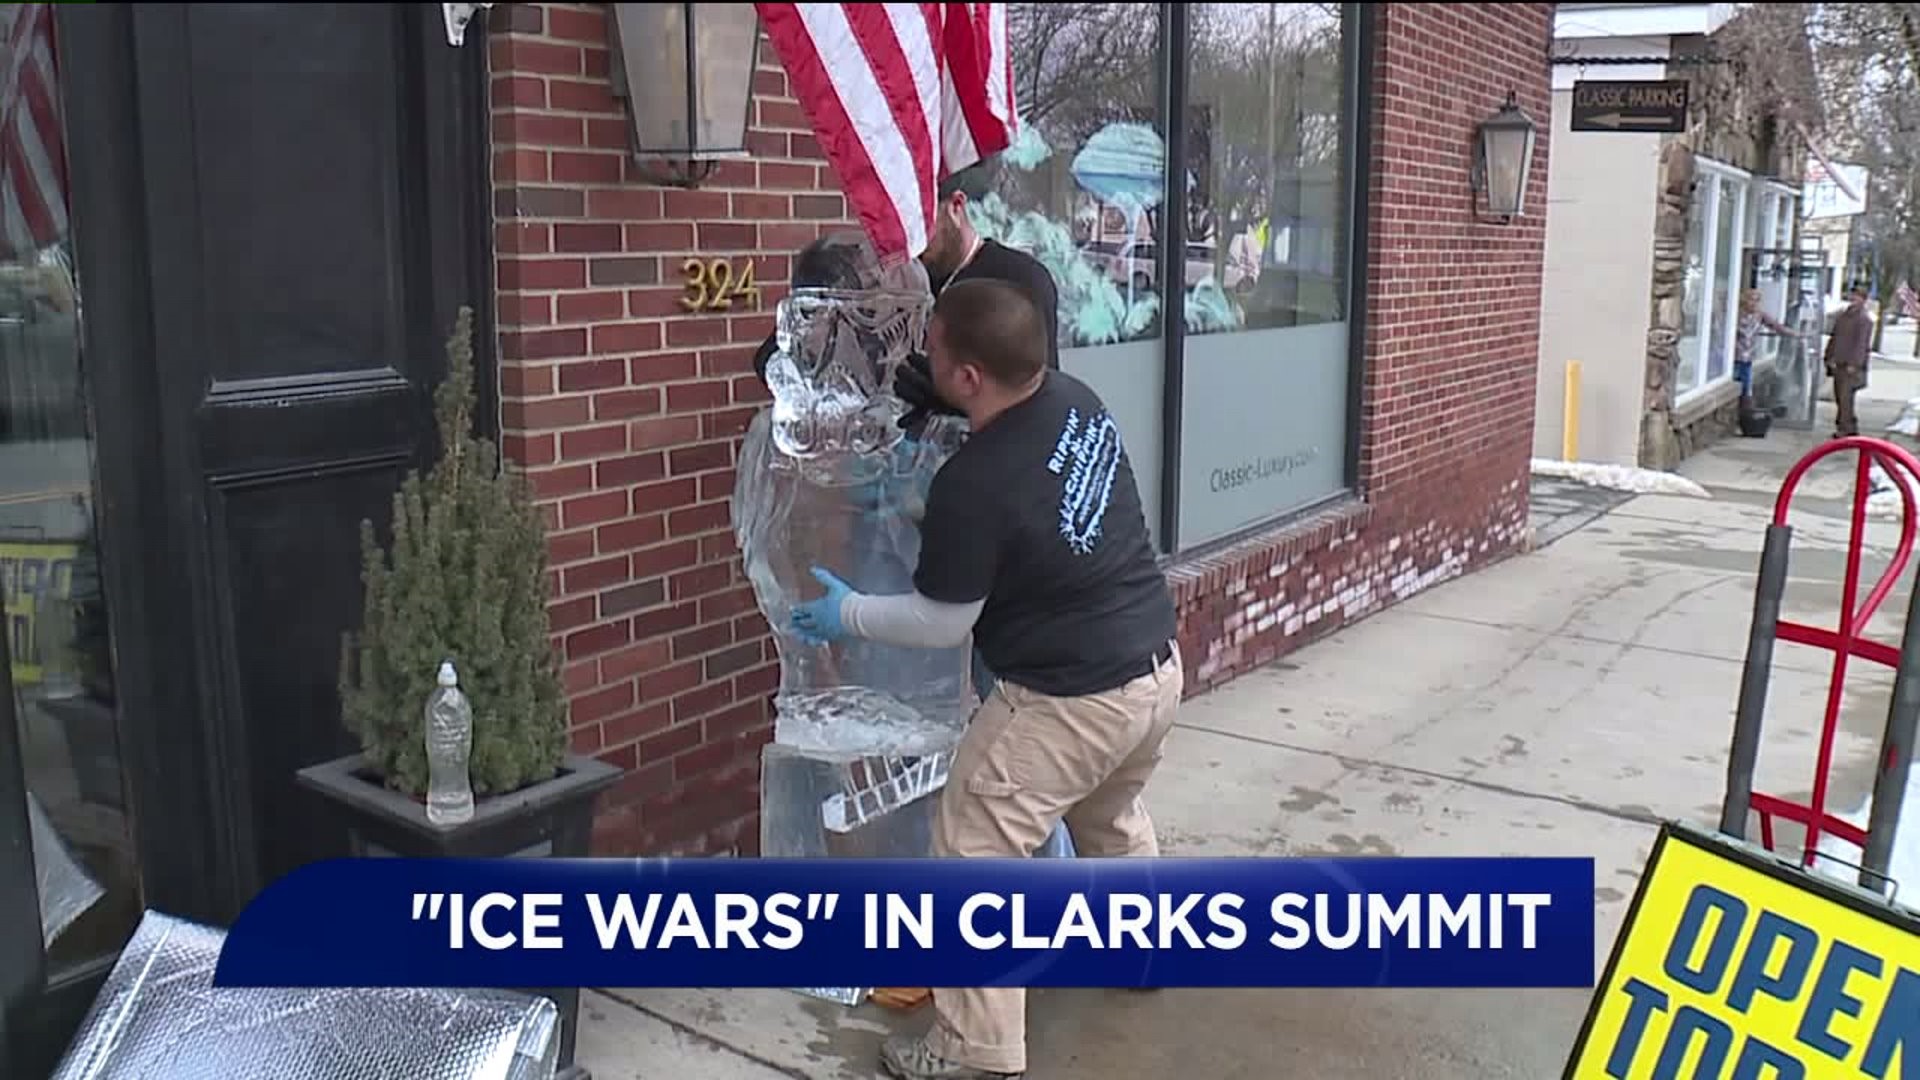 A Star Wars Celebration at Annual Ice Festival